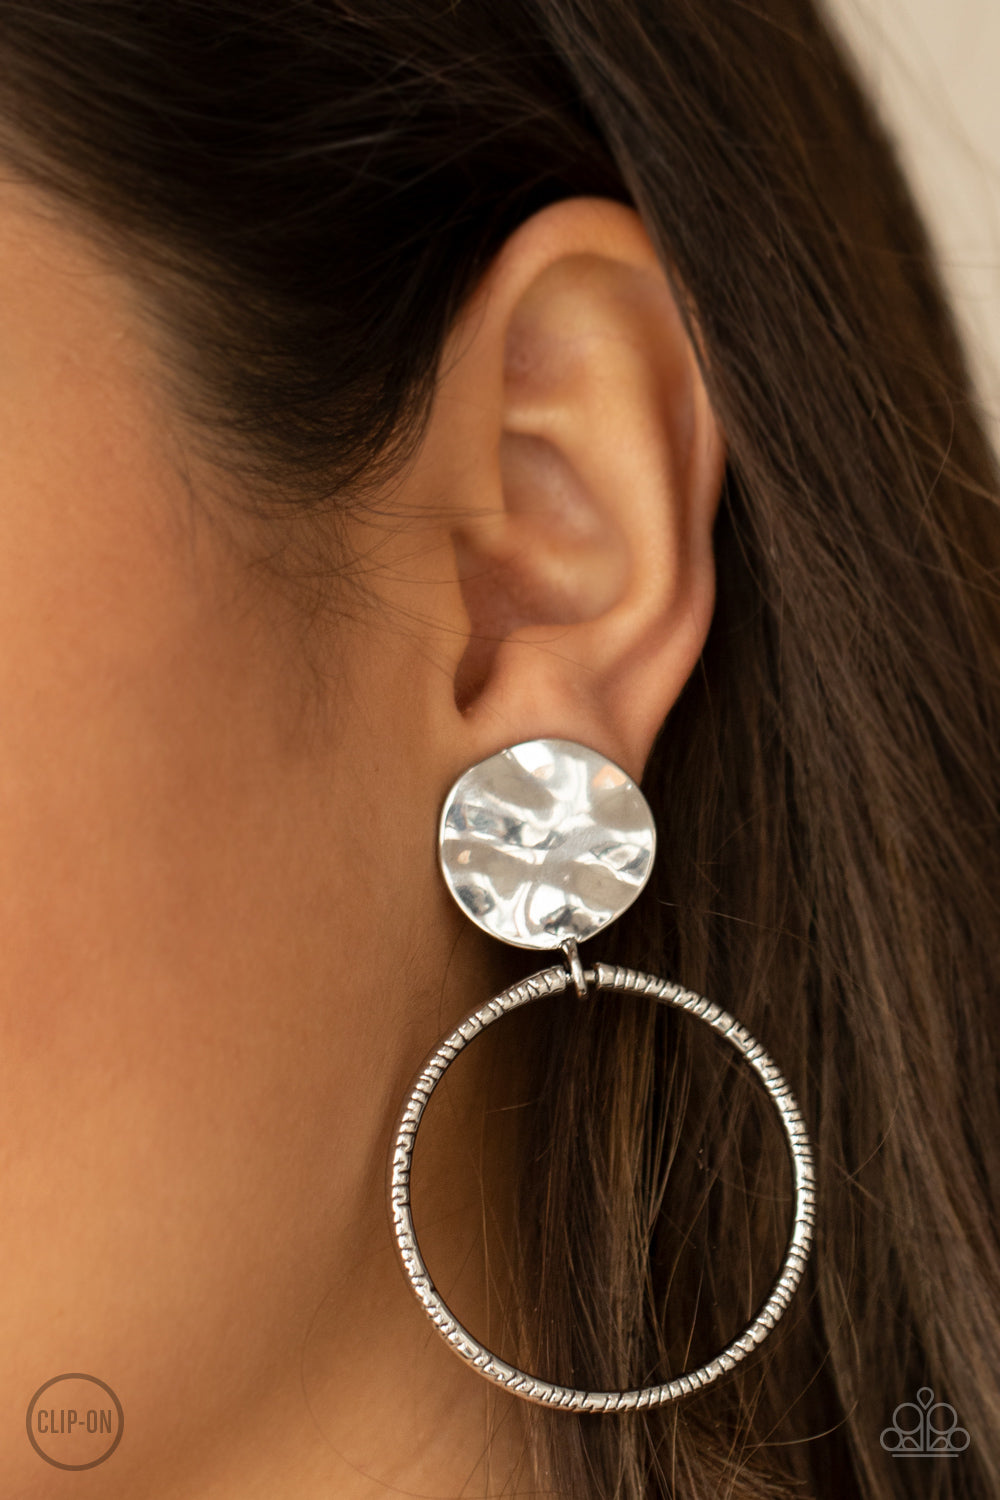 Undeniably Urban Silver Clip-On Earring - Paparazzi Accessories  A textured silver hoop attaches to a hammered silver disc, creating an edgy hoop. Earring attaches to a standard clip-on fitting.  All Paparazzi Accessories are lead free and nickel free!  Sold as one pair of clip-on earrings.